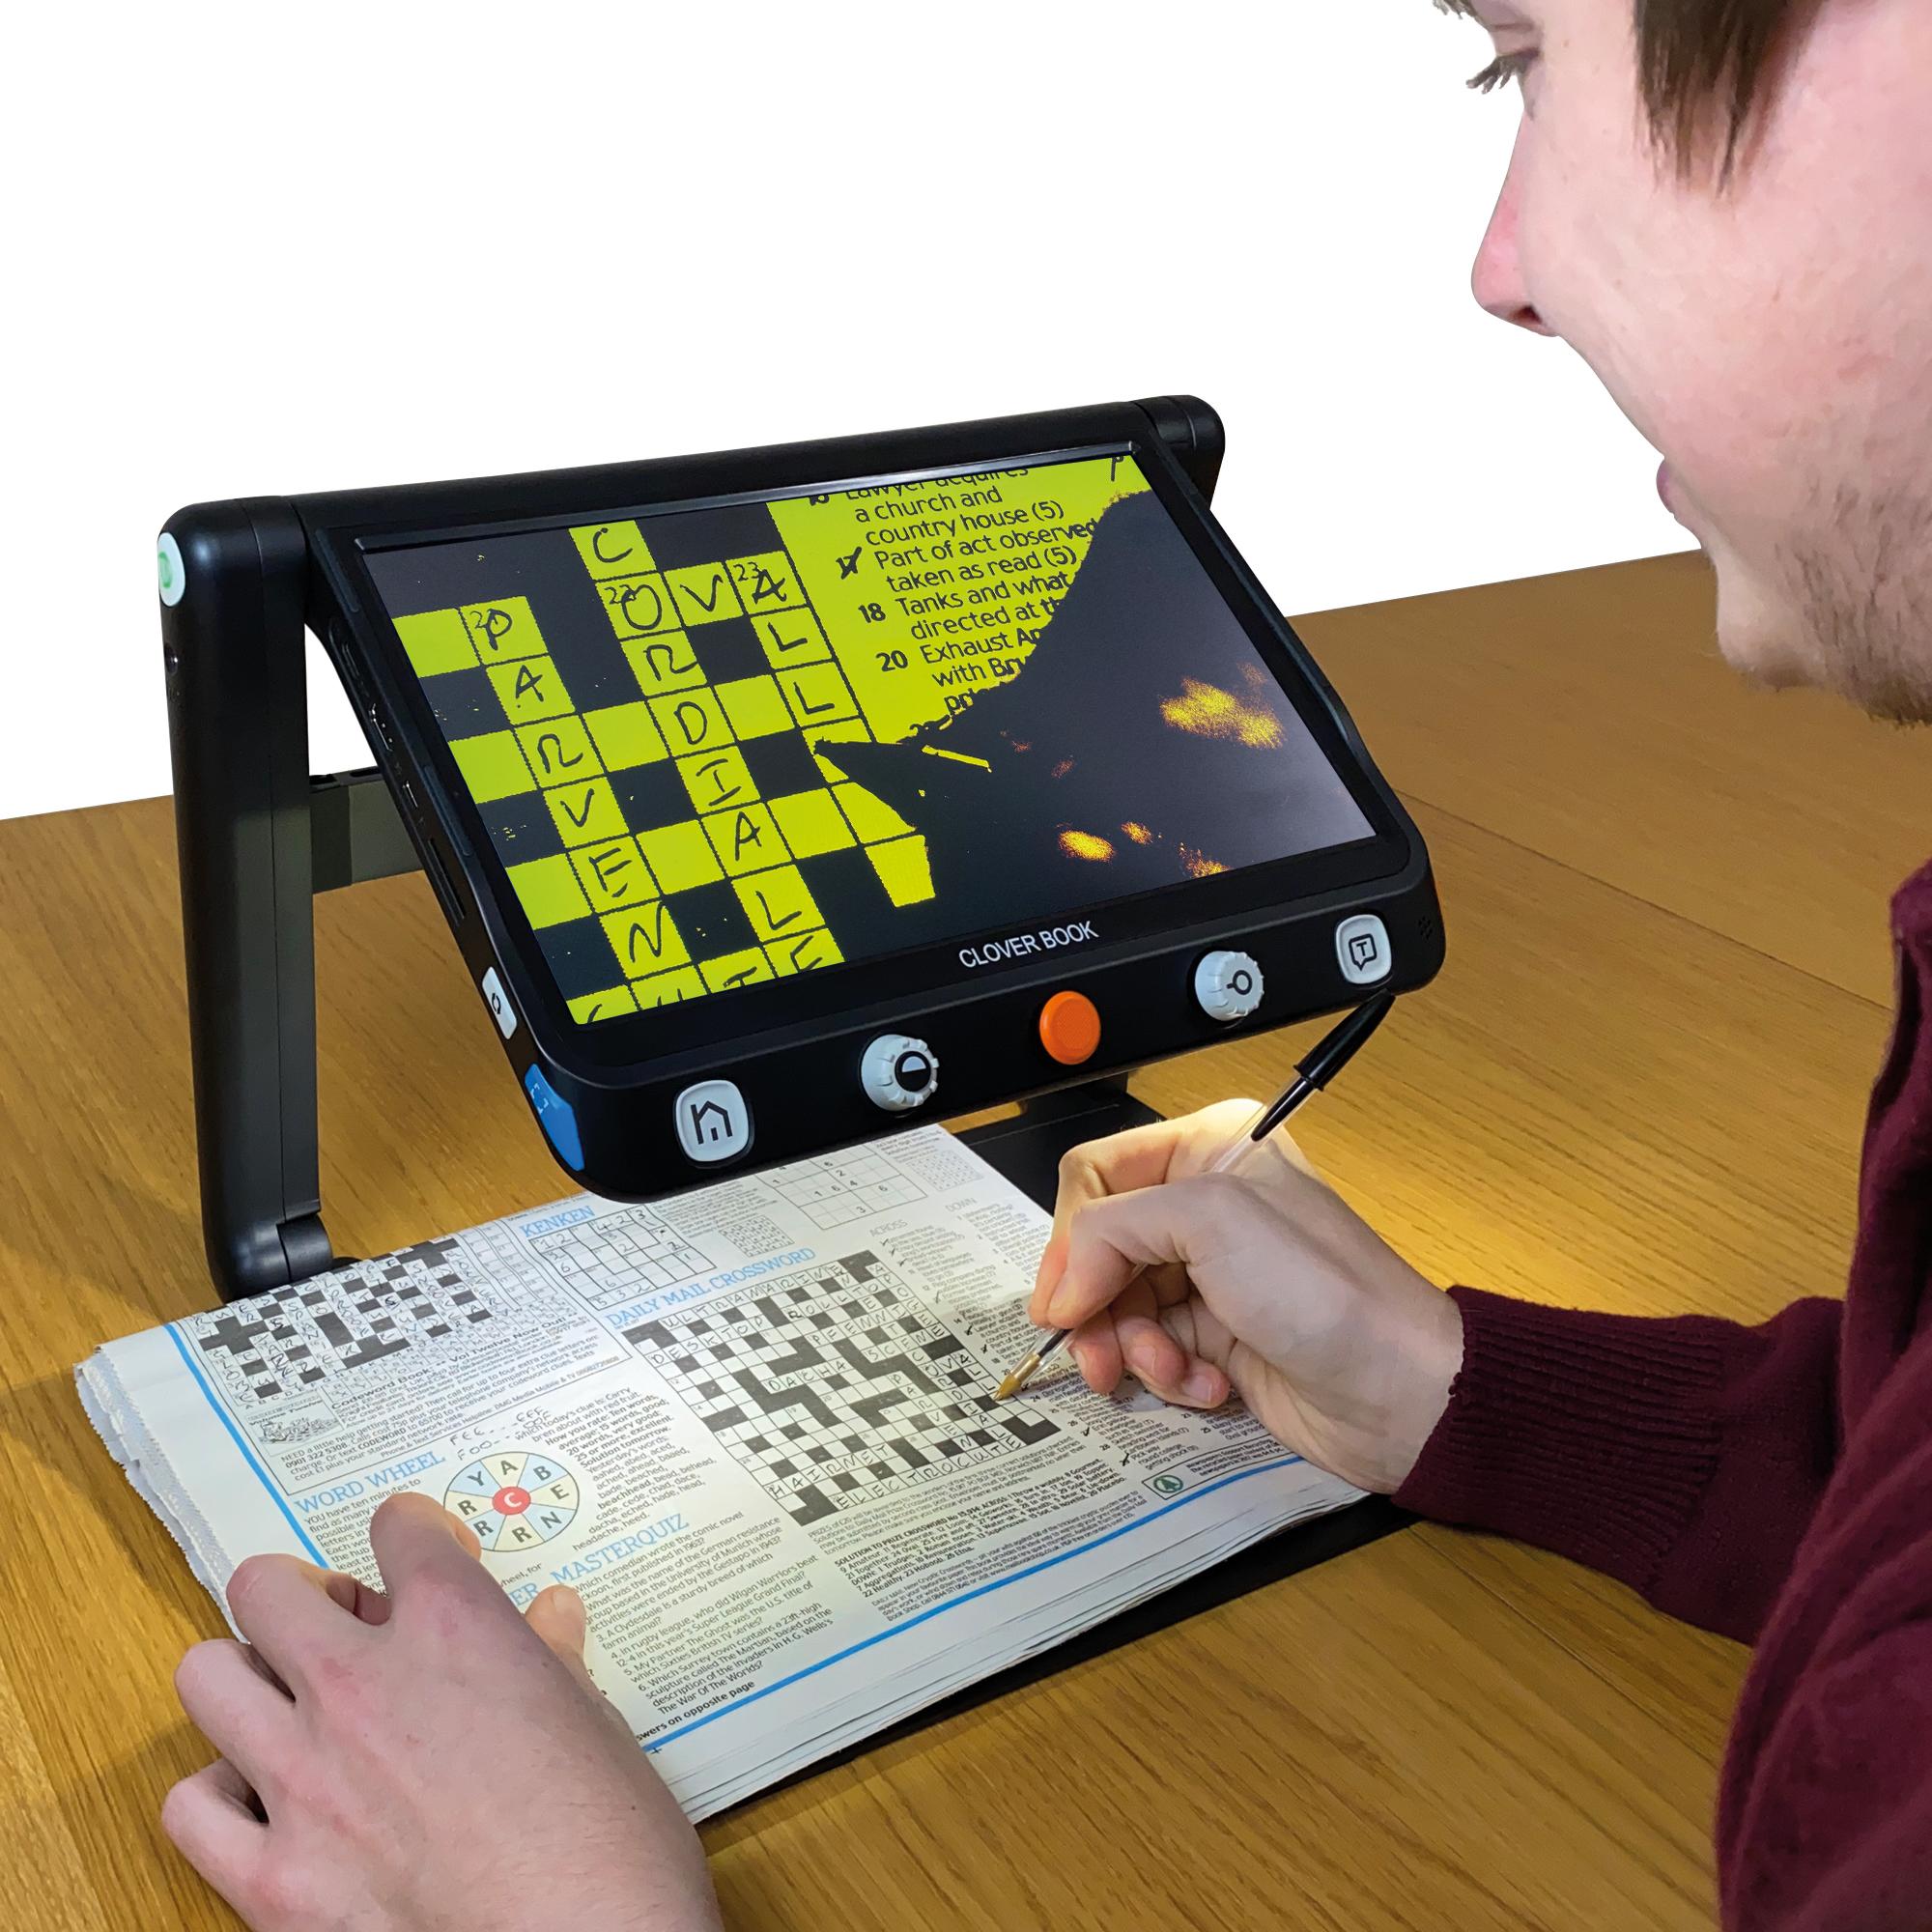 Clover Book magnifying a crossword with the screen showing an enhanced colour mode; black on yellow